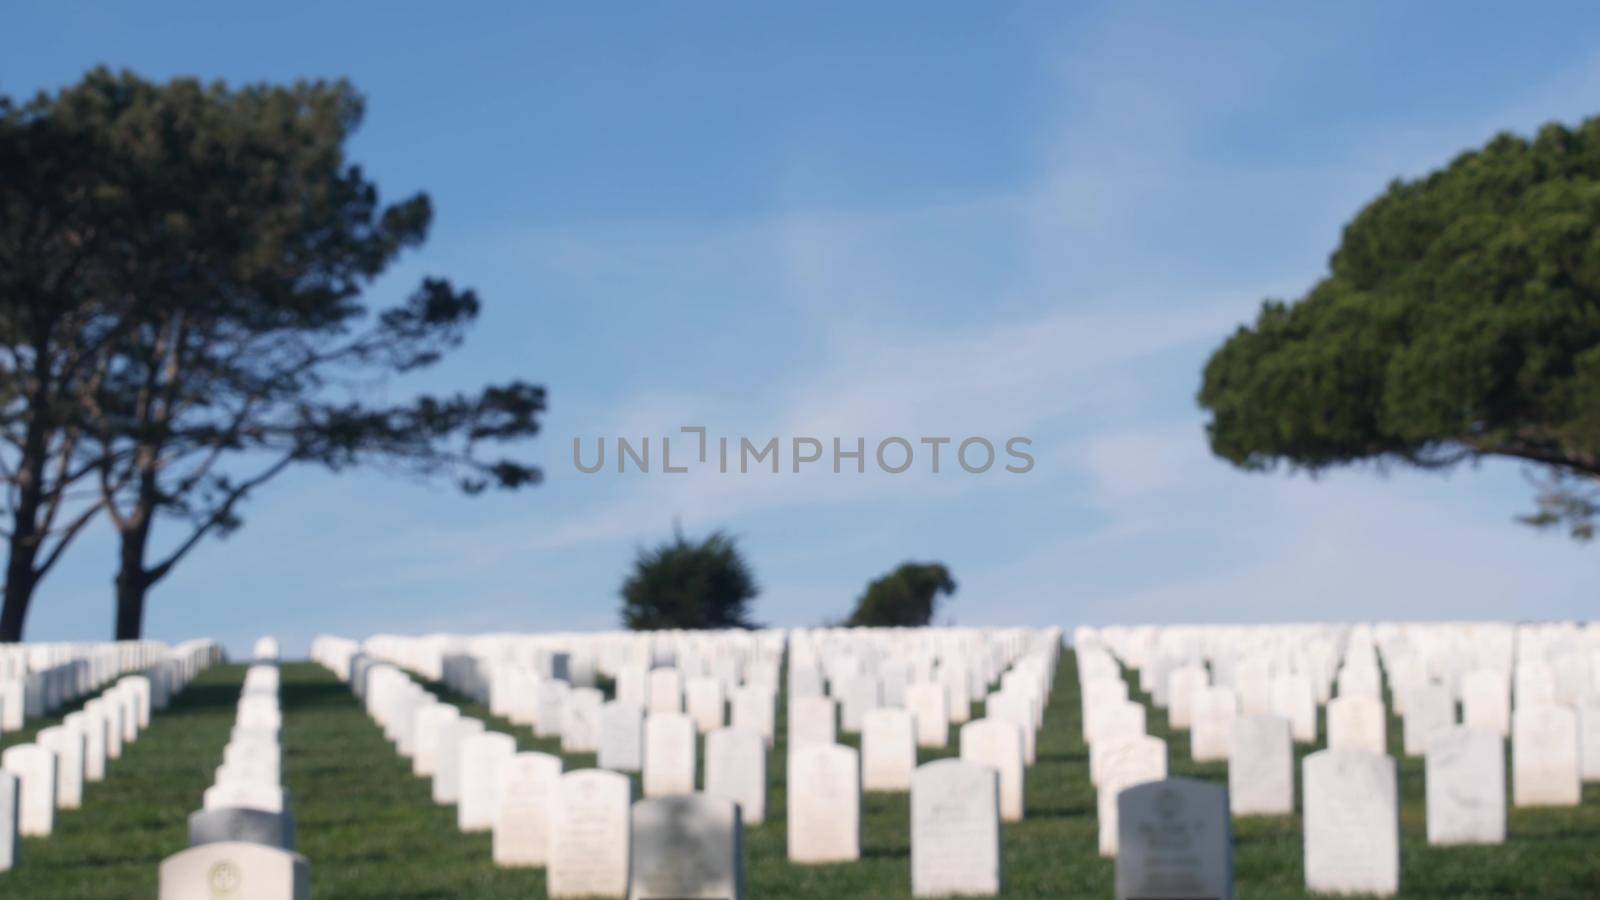 Defocused tombstones, american military national memorial cemetery, graveyard in USA. Headstones or gravestones, green grass. Respect and honor for armed forces soldiers. Veterans and Remembrance Day.